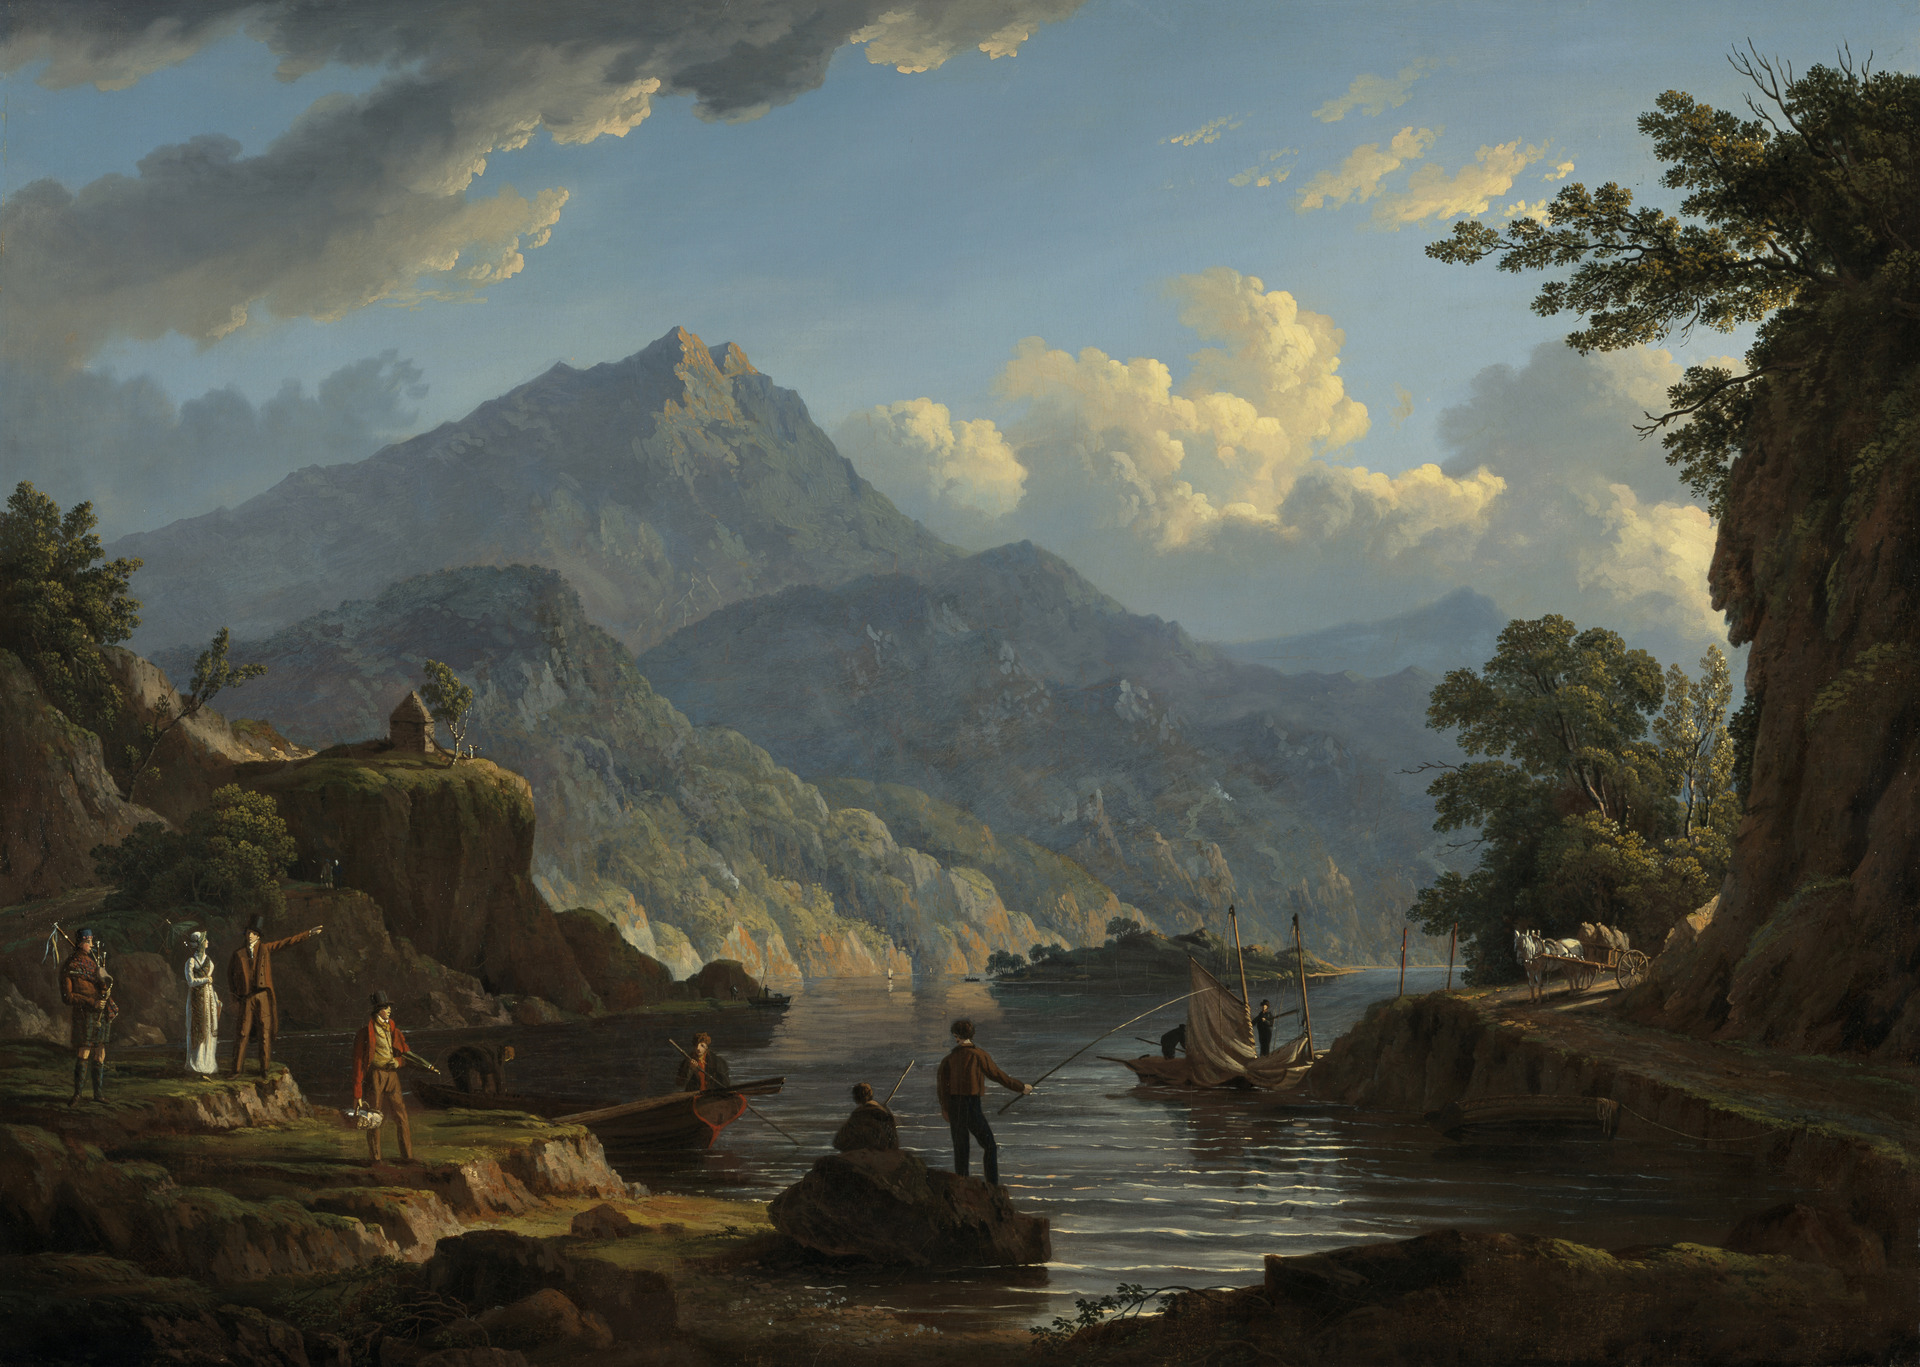 John Knox, 'Landscape with Tourists at Loch Katrin', oil on canvas, 1815 credit National Galleries of Scotland.jpg